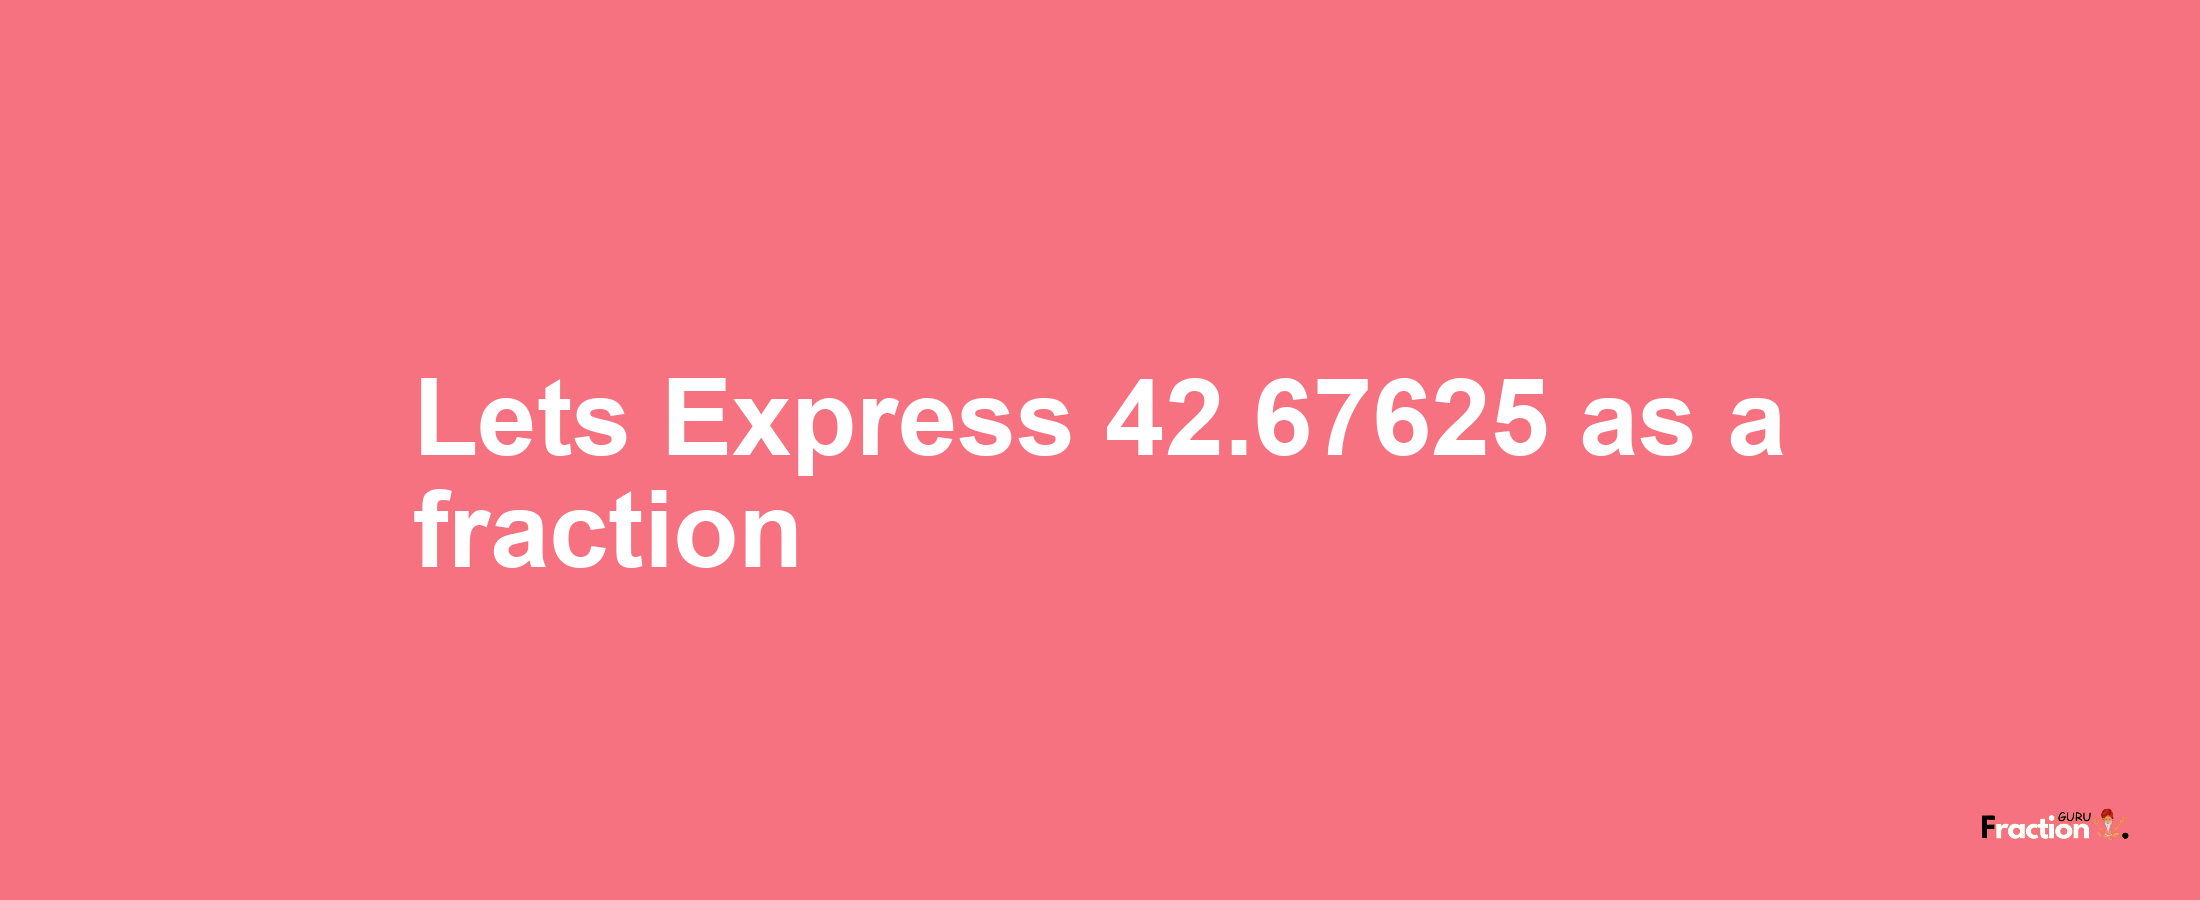 Lets Express 42.67625 as afraction